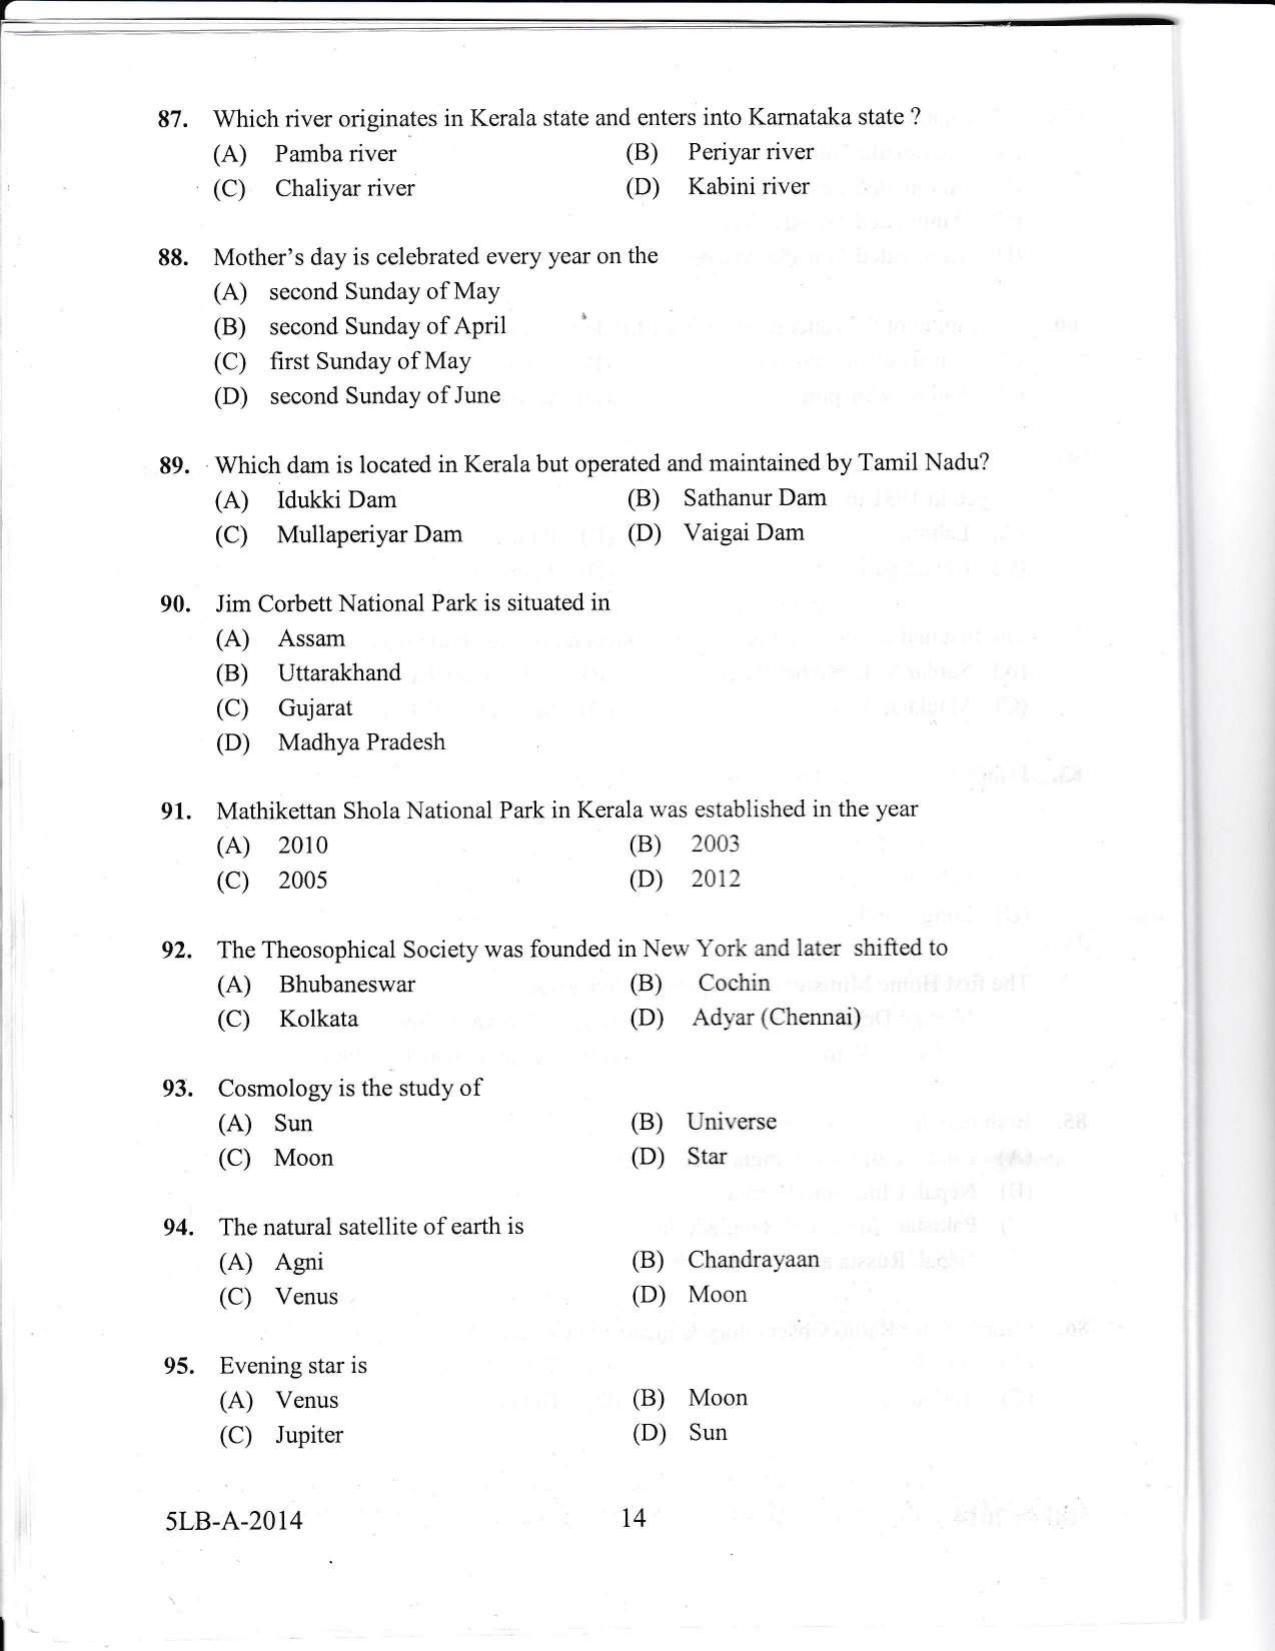 KLEE 5 Year LLB Exam 2014 Question Paper - Page 14